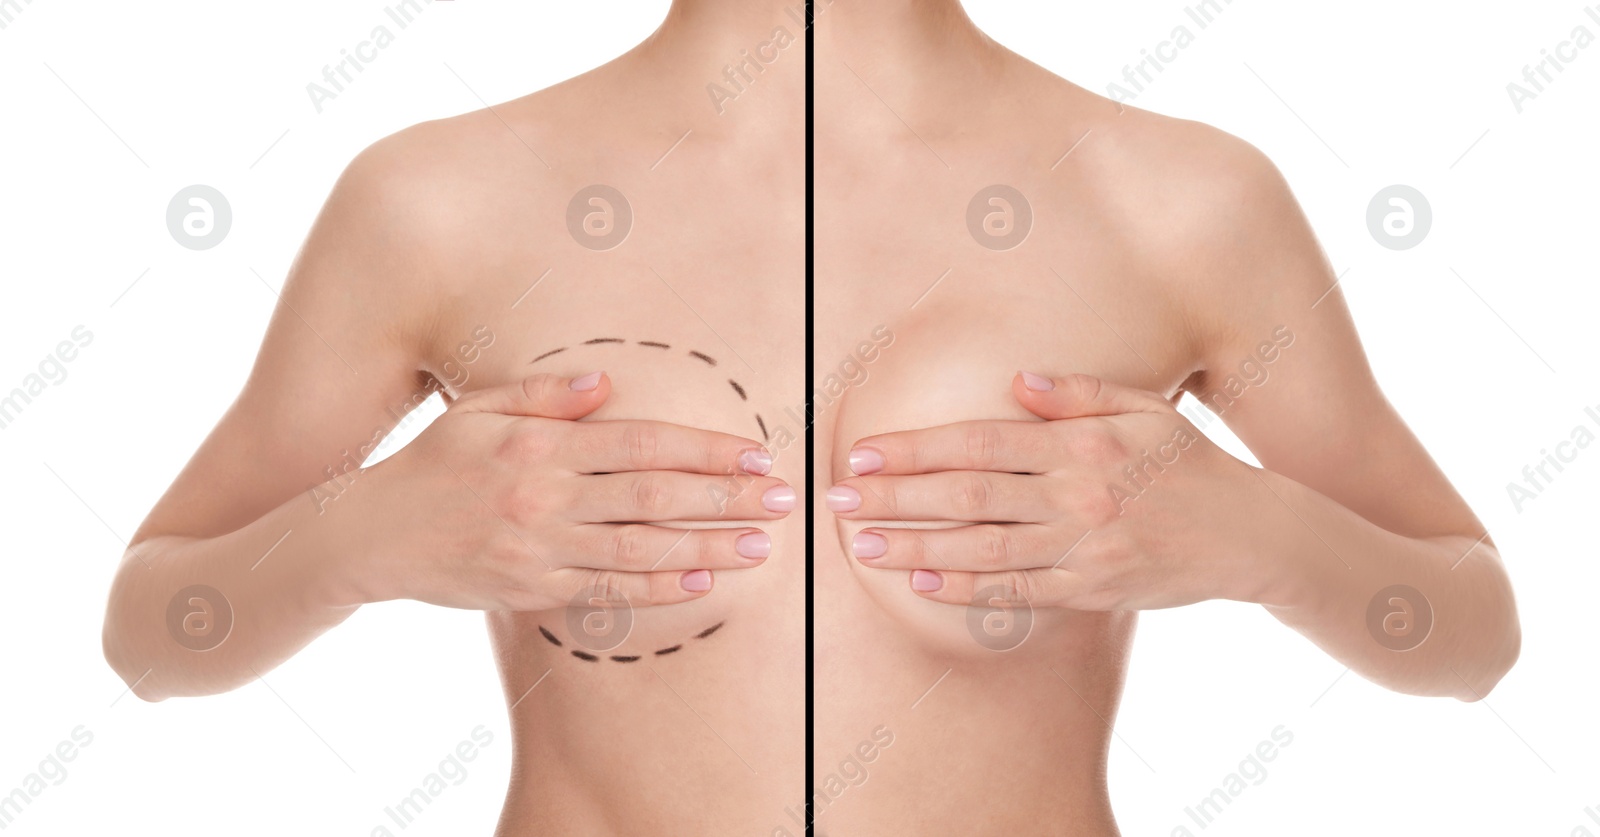 Image of Breast augmentation with silicone implant. Photo of woman divided in halves before and after plastic surgery, collage on white background